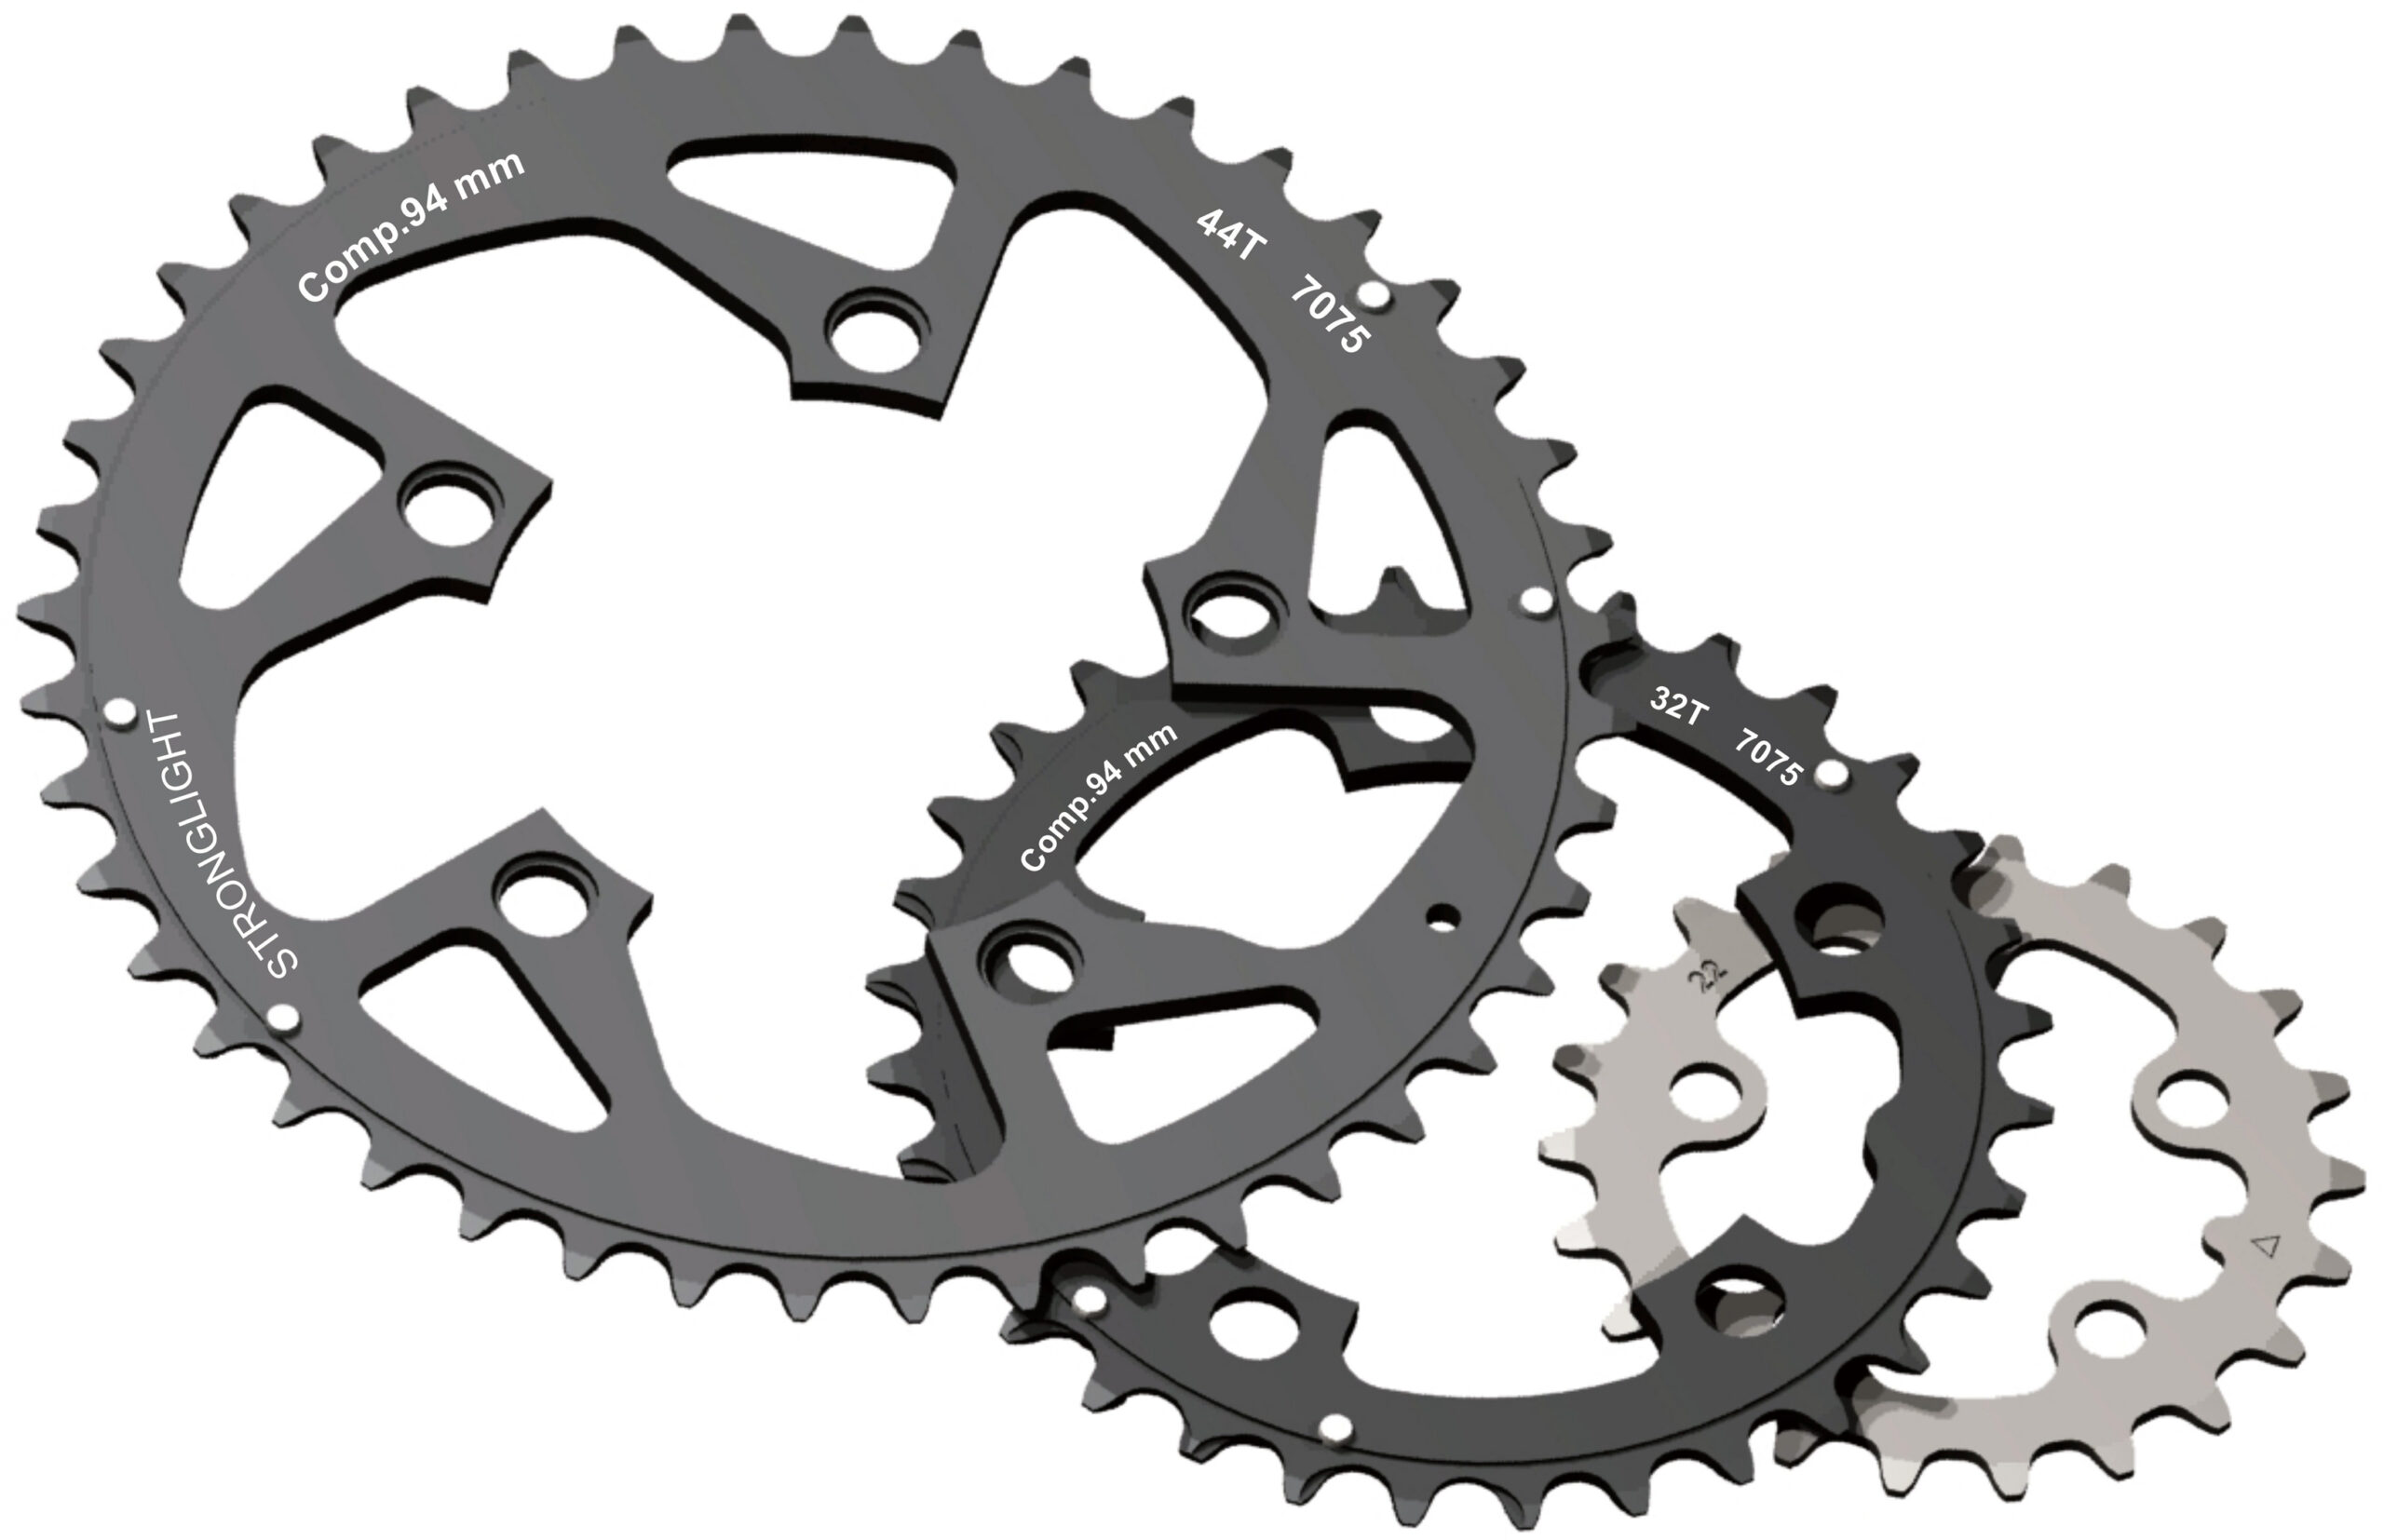 RZ09444Z Stronglight 44T With Pins 5-Arm/94mm Chainring